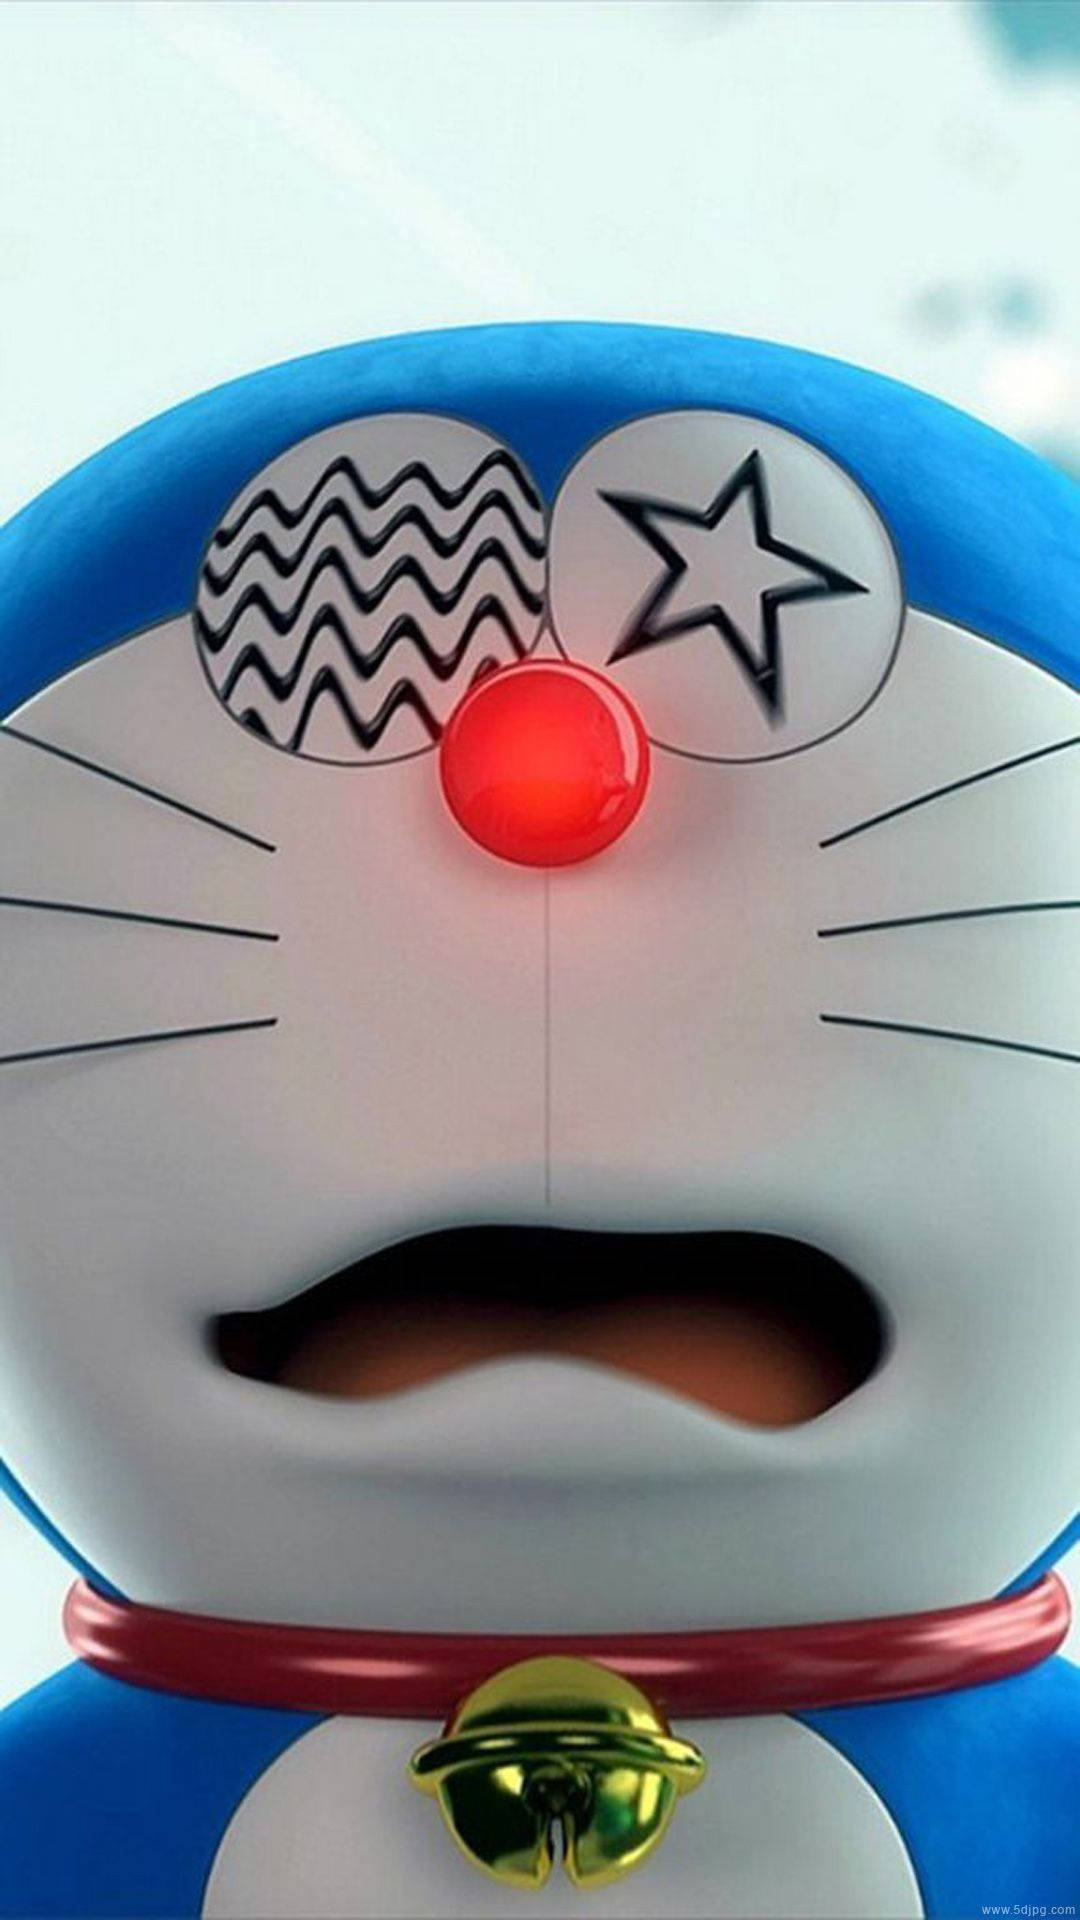 Stand By Me Dizzy Doraemon Iphone Background